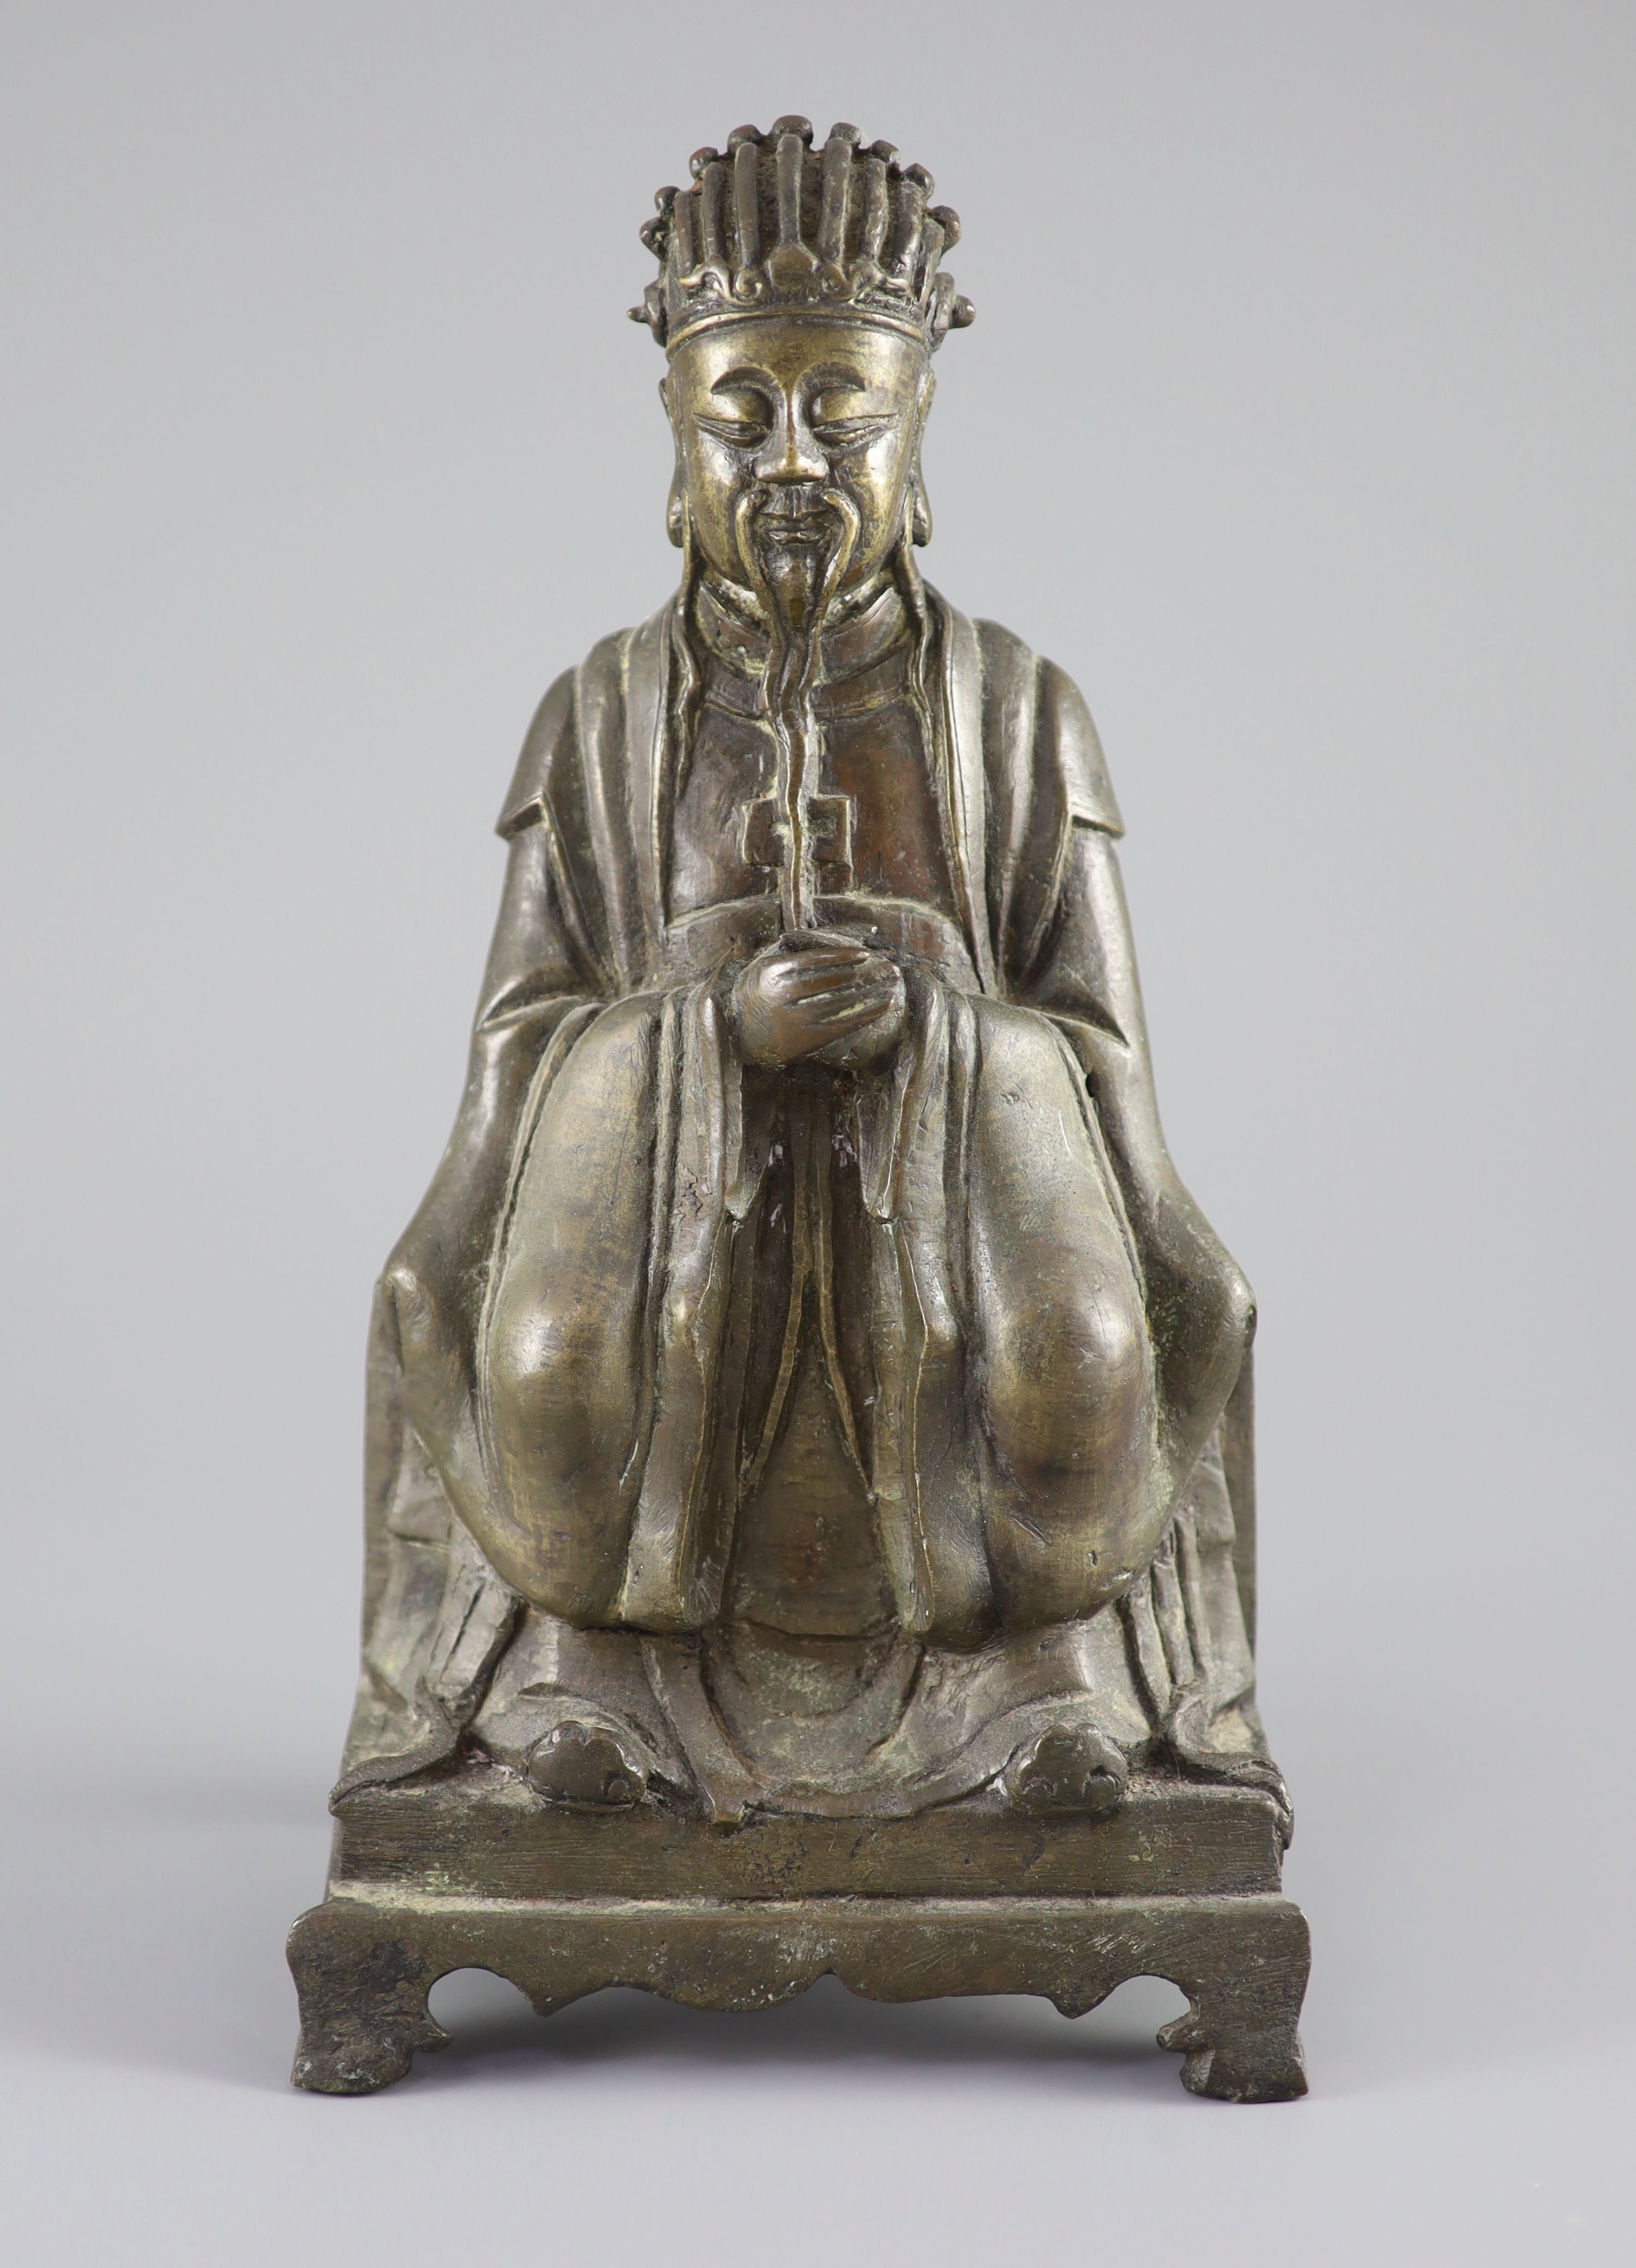 A Chinese bronze seated figure of Wenchang Wang, late Ming dynasty, 17th century, 27 cm high